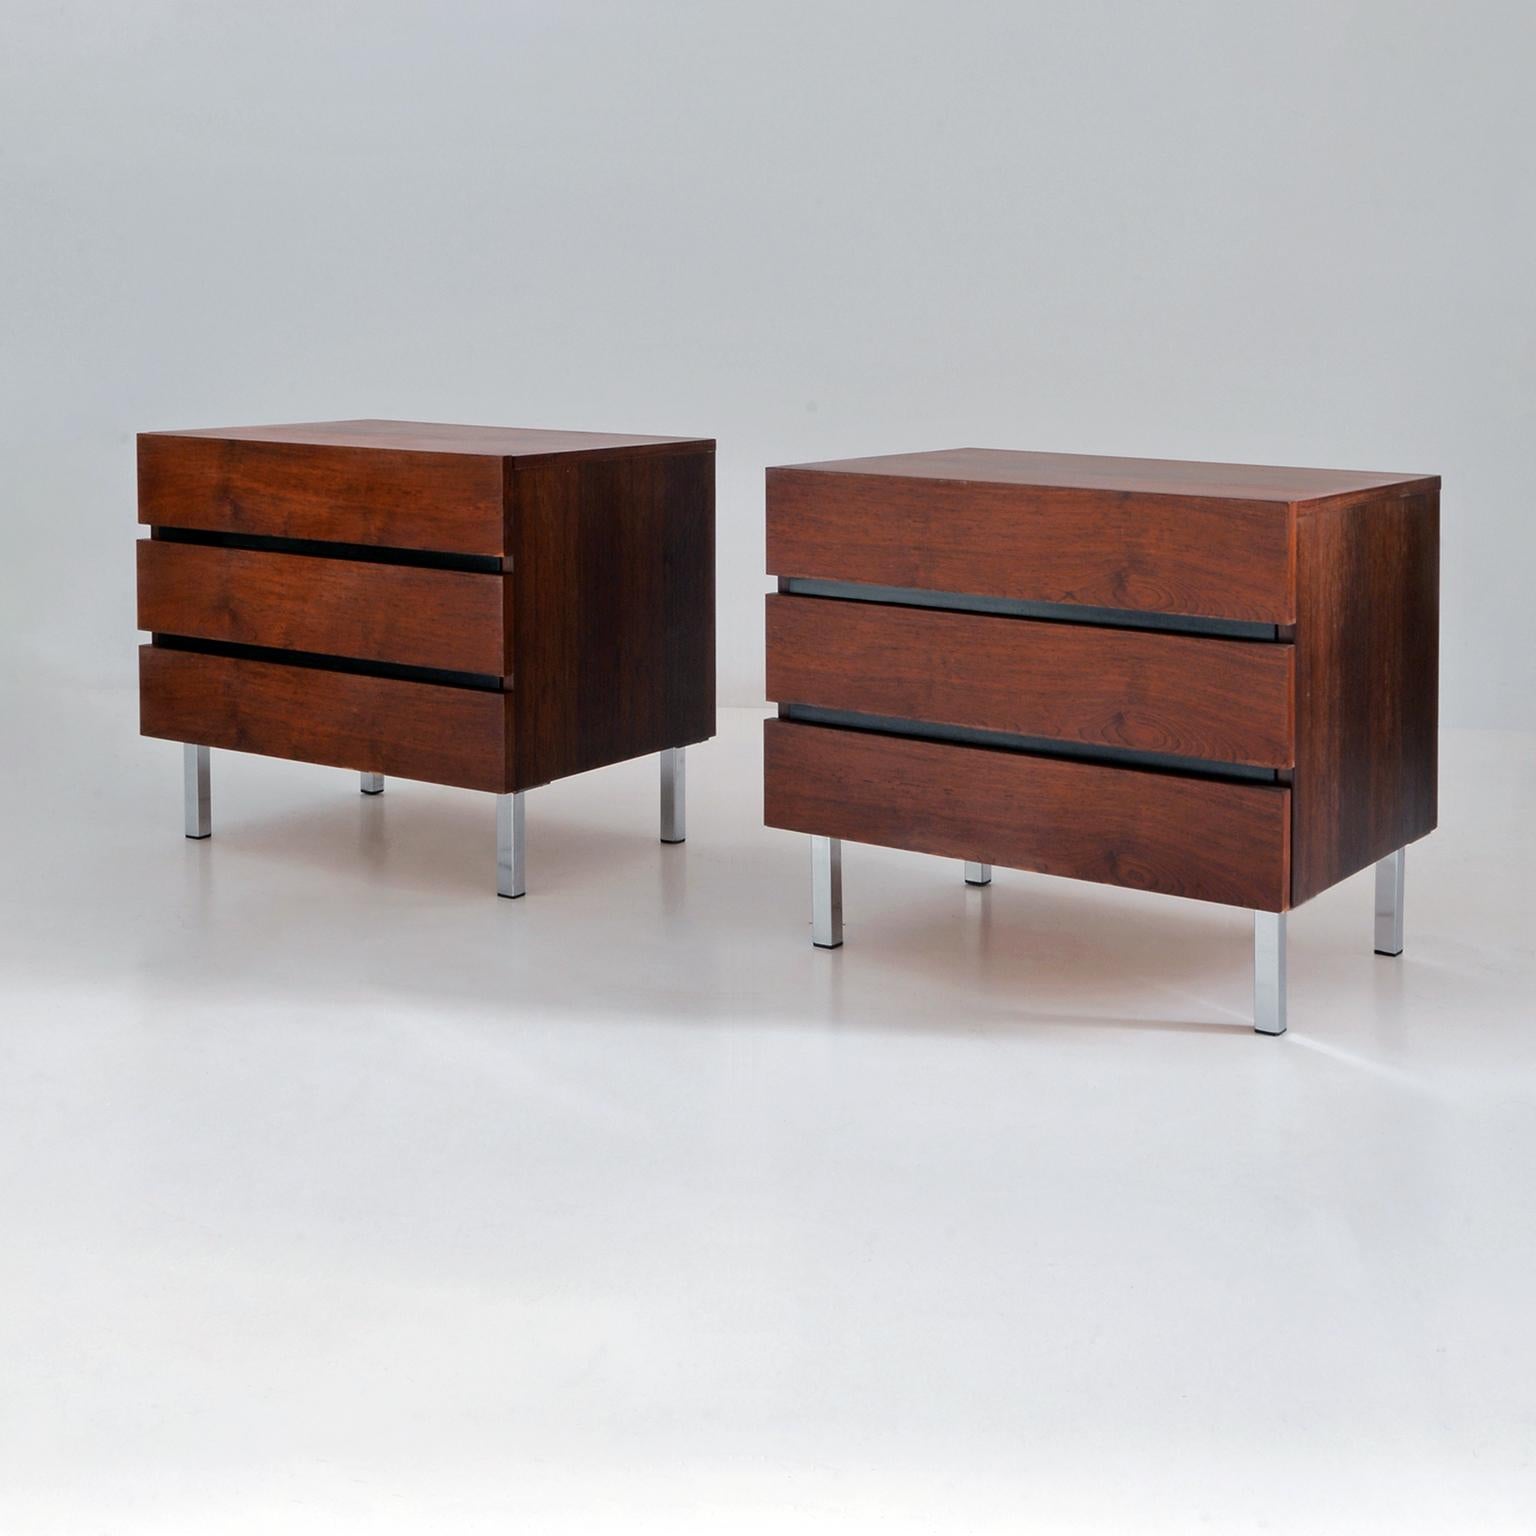 Mid-century nightstands in rosewood veneer, each with three drawers. The rectangular cabinets stand on four rectangular chromed metal feet. The general vintage condition is good.